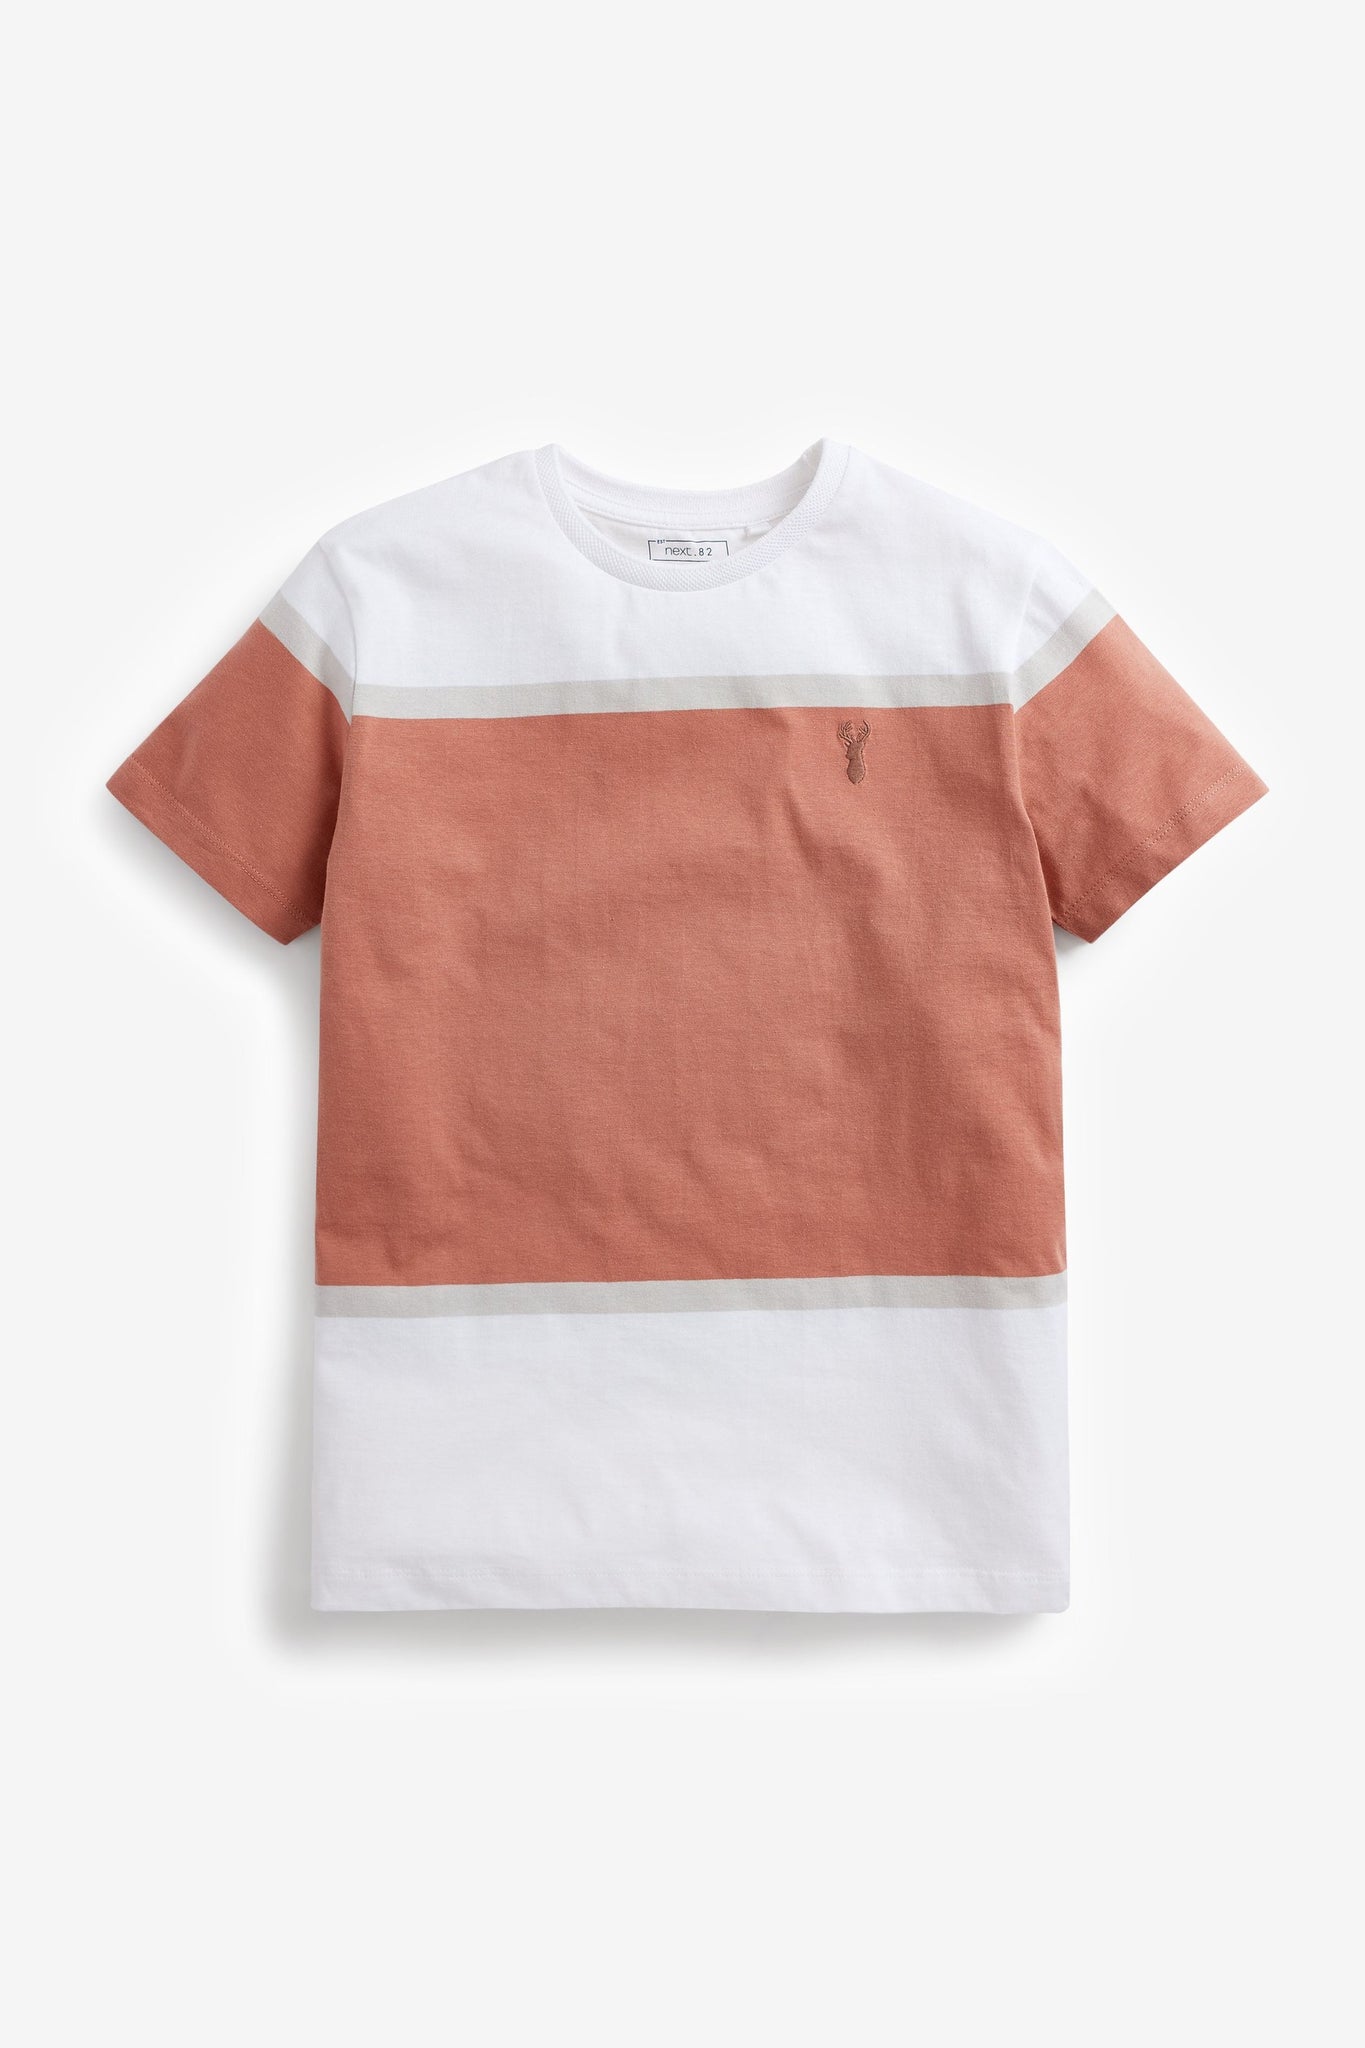 Next Coral Colourblock Older Boys T-Shirt - Stockpoint Apparel Outlet